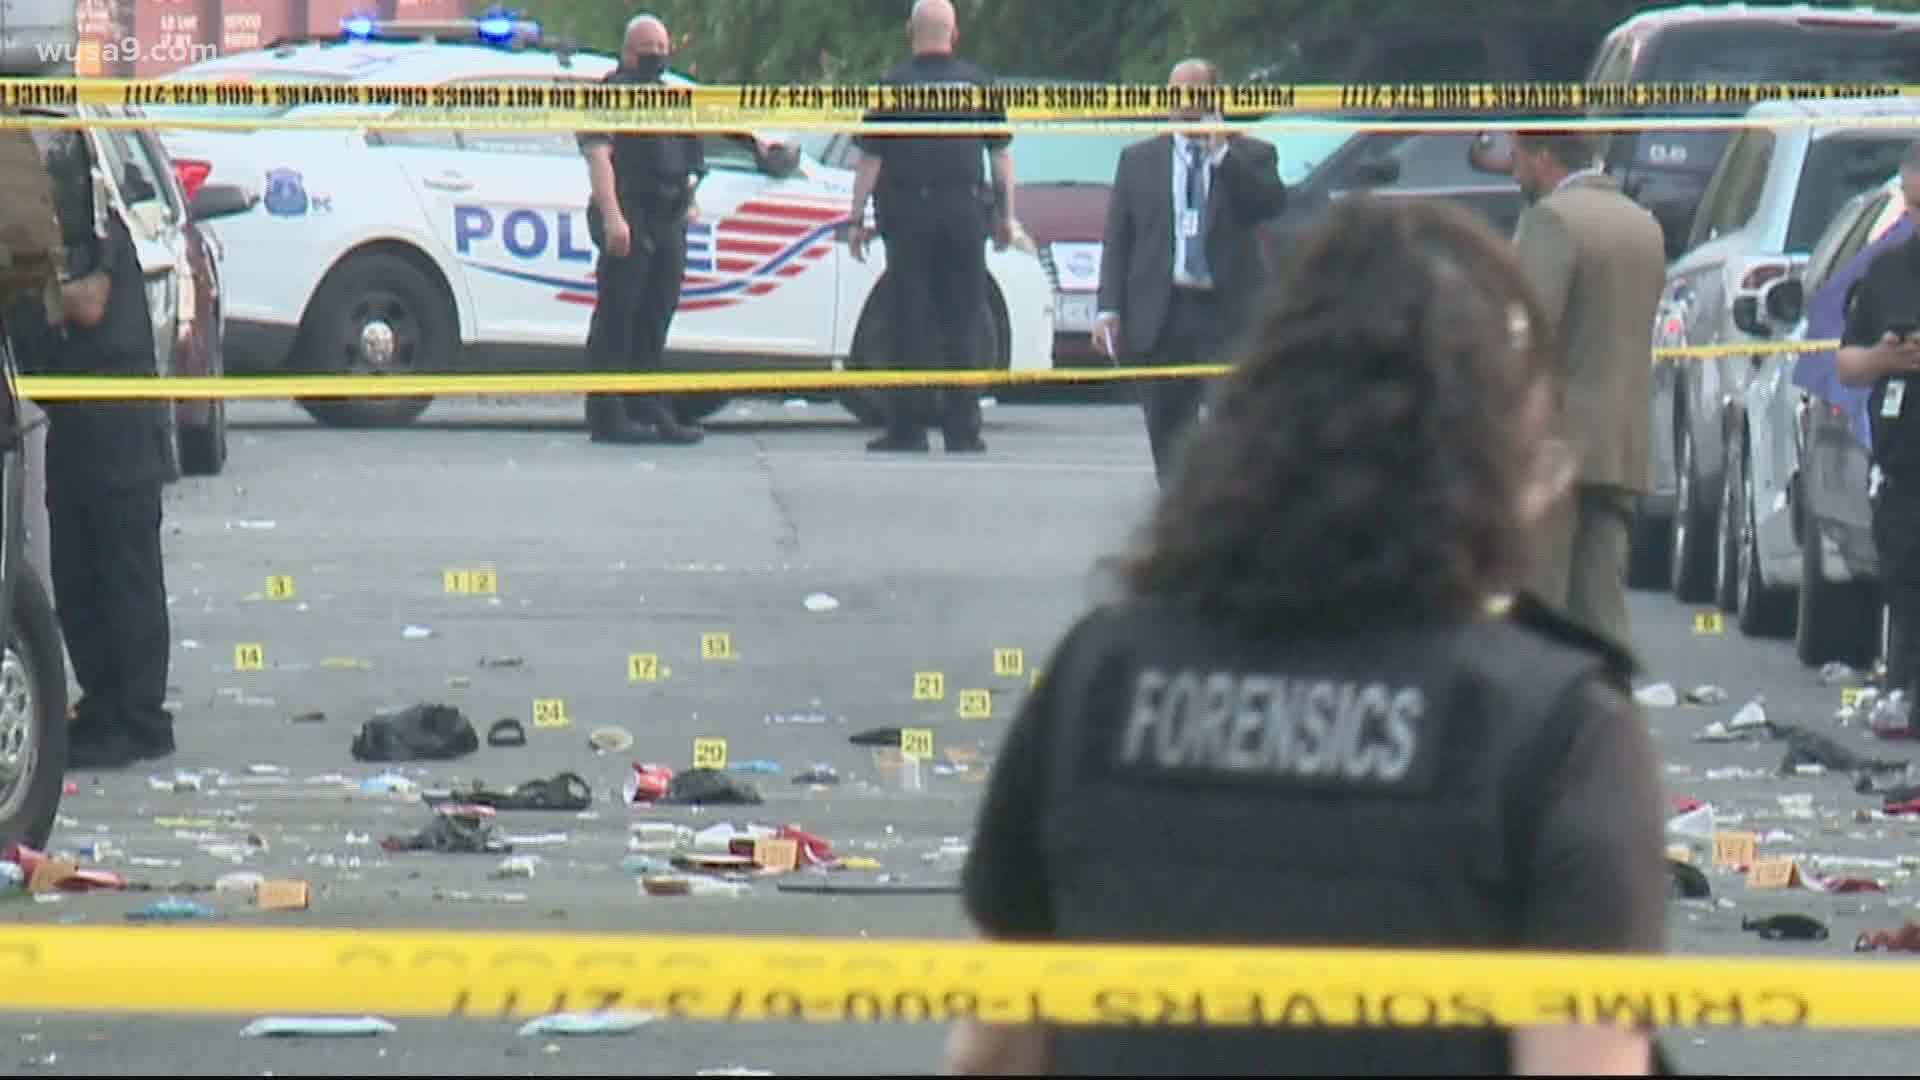 The community asks why more wasn't done to prevent tragedy after 22 people were hit by gunfire at a deadly shooting in Southeast DC over the weekend.